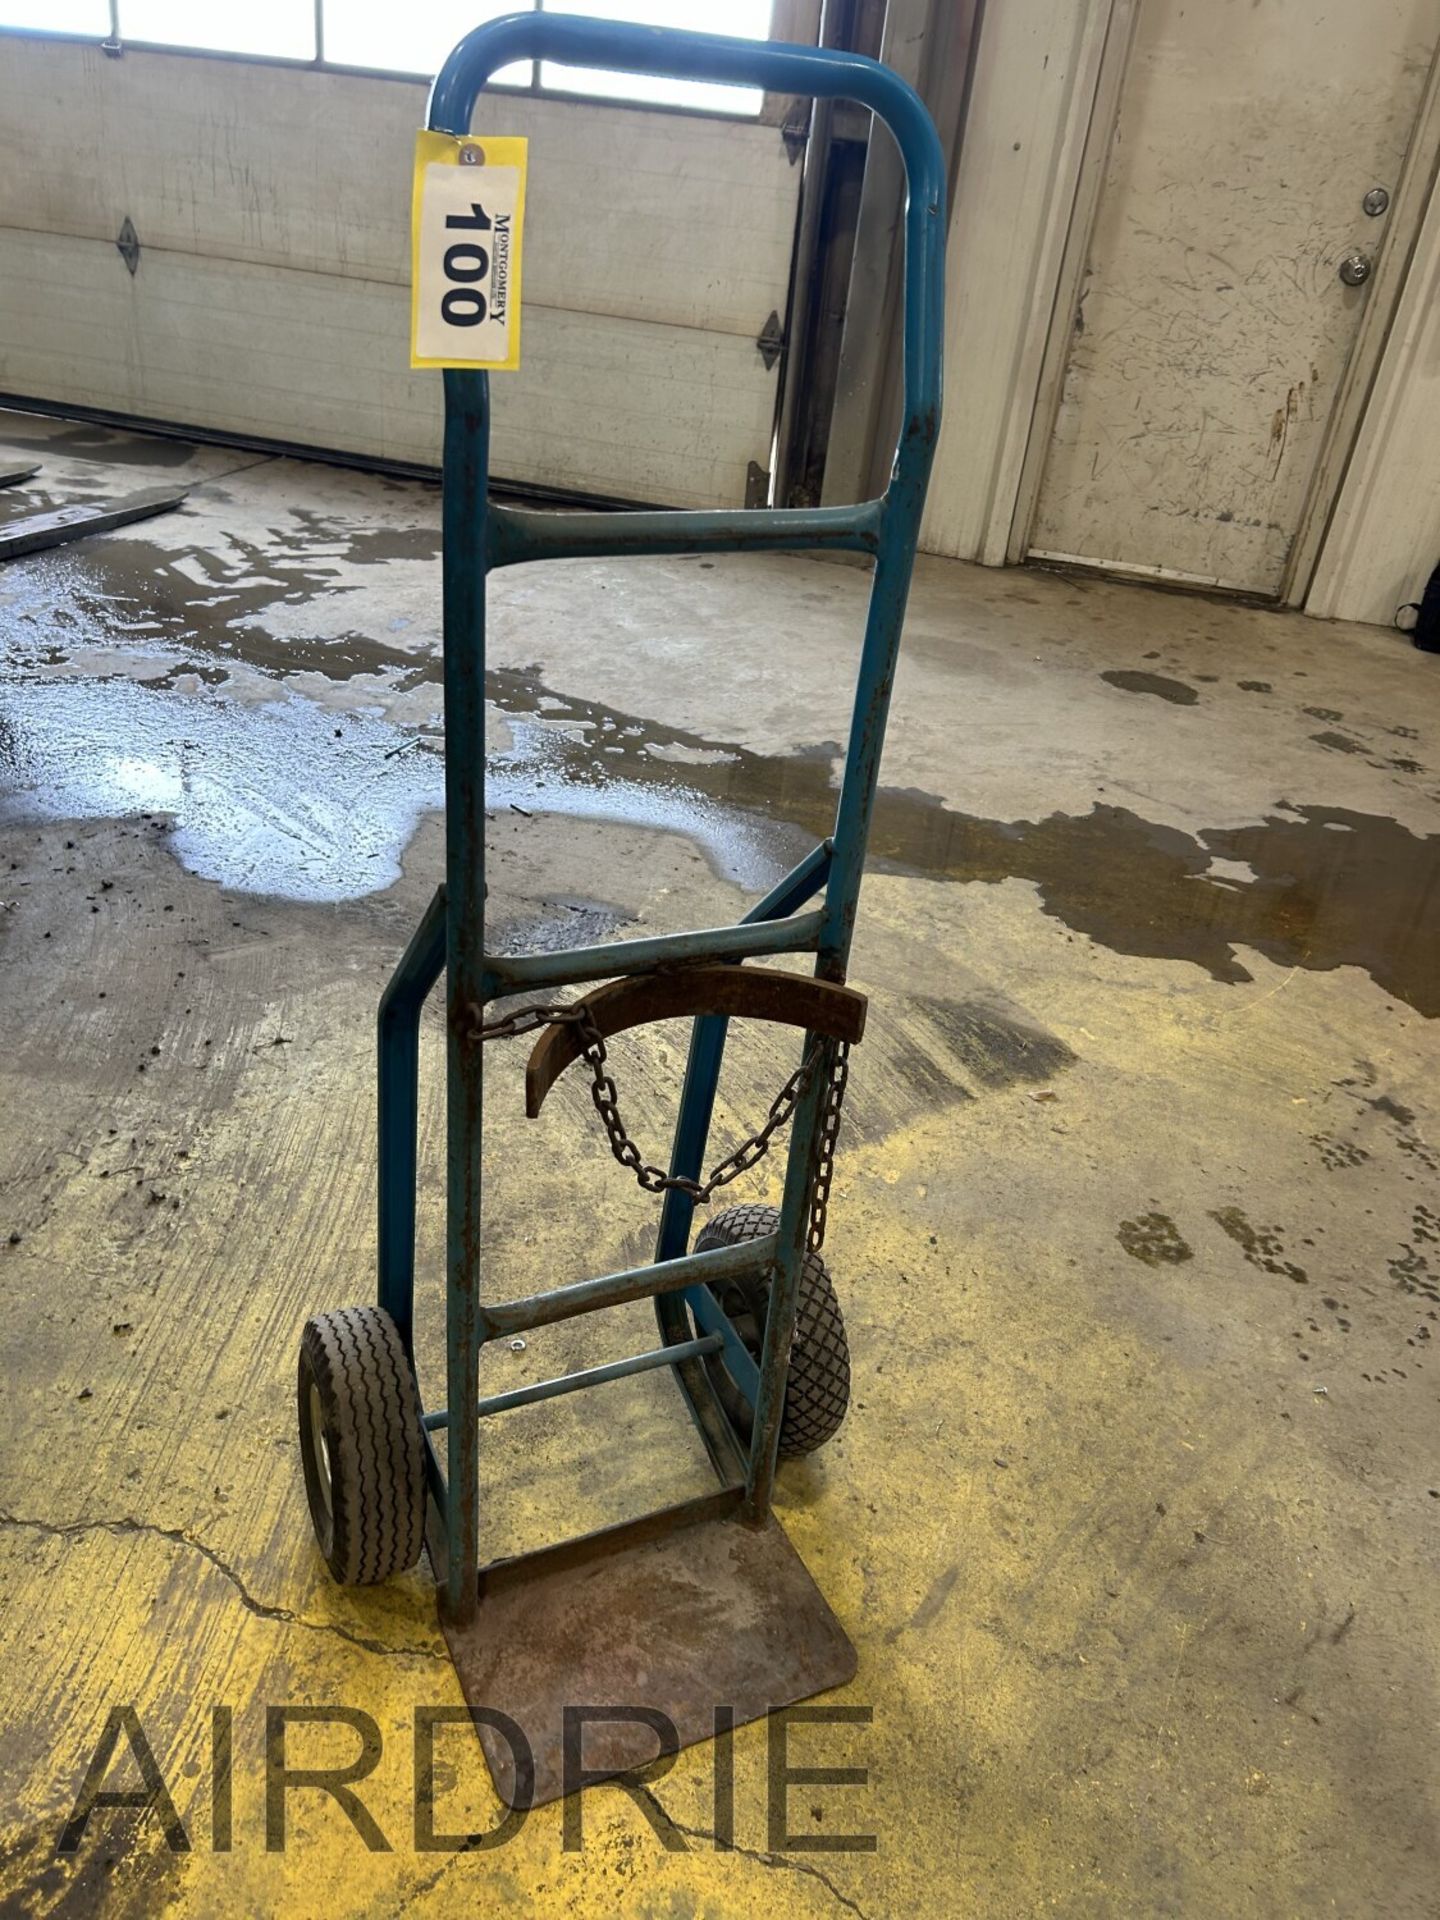 *OFFSITE* HAND DOLLY CUSTOMIZED INTO BOTTLE CART